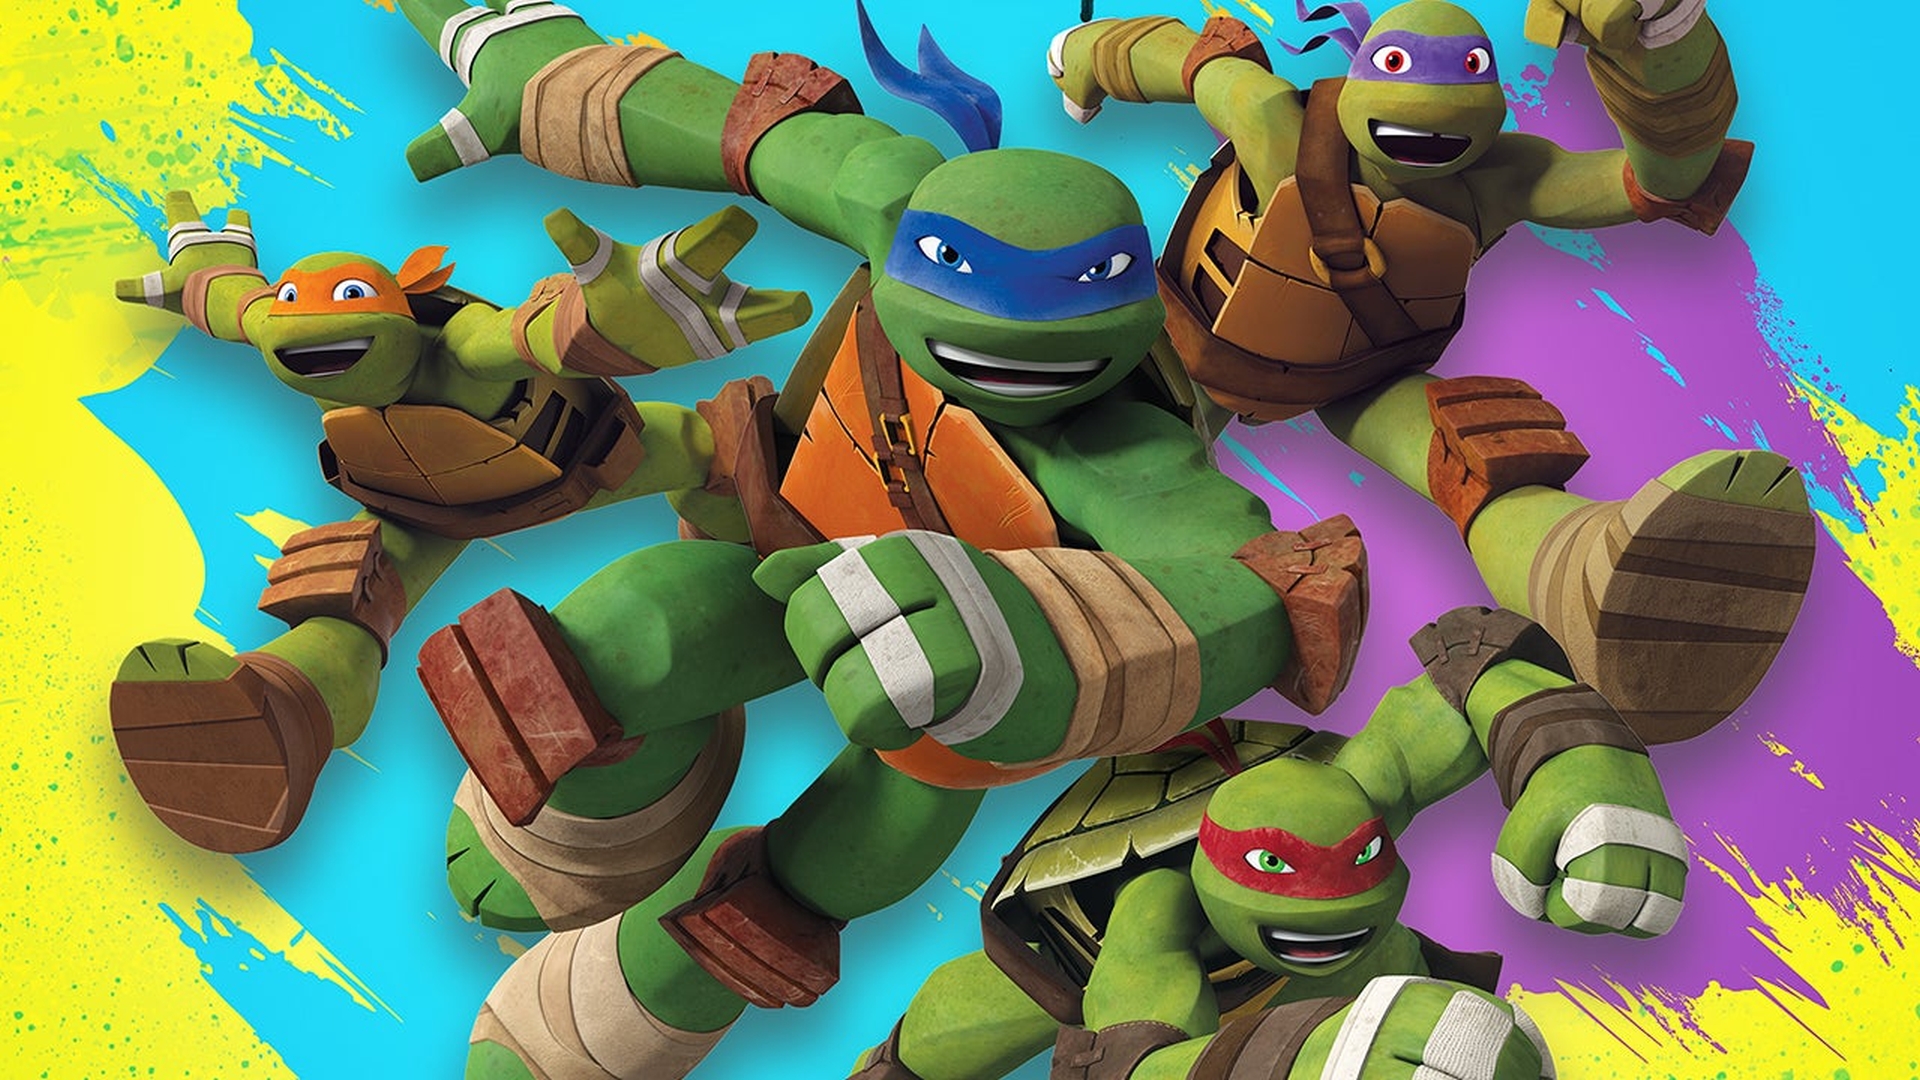 The release of Teenage Mutant Ninja Turtles Arcade: Wrath of the Mutants Coming will be released on April 23